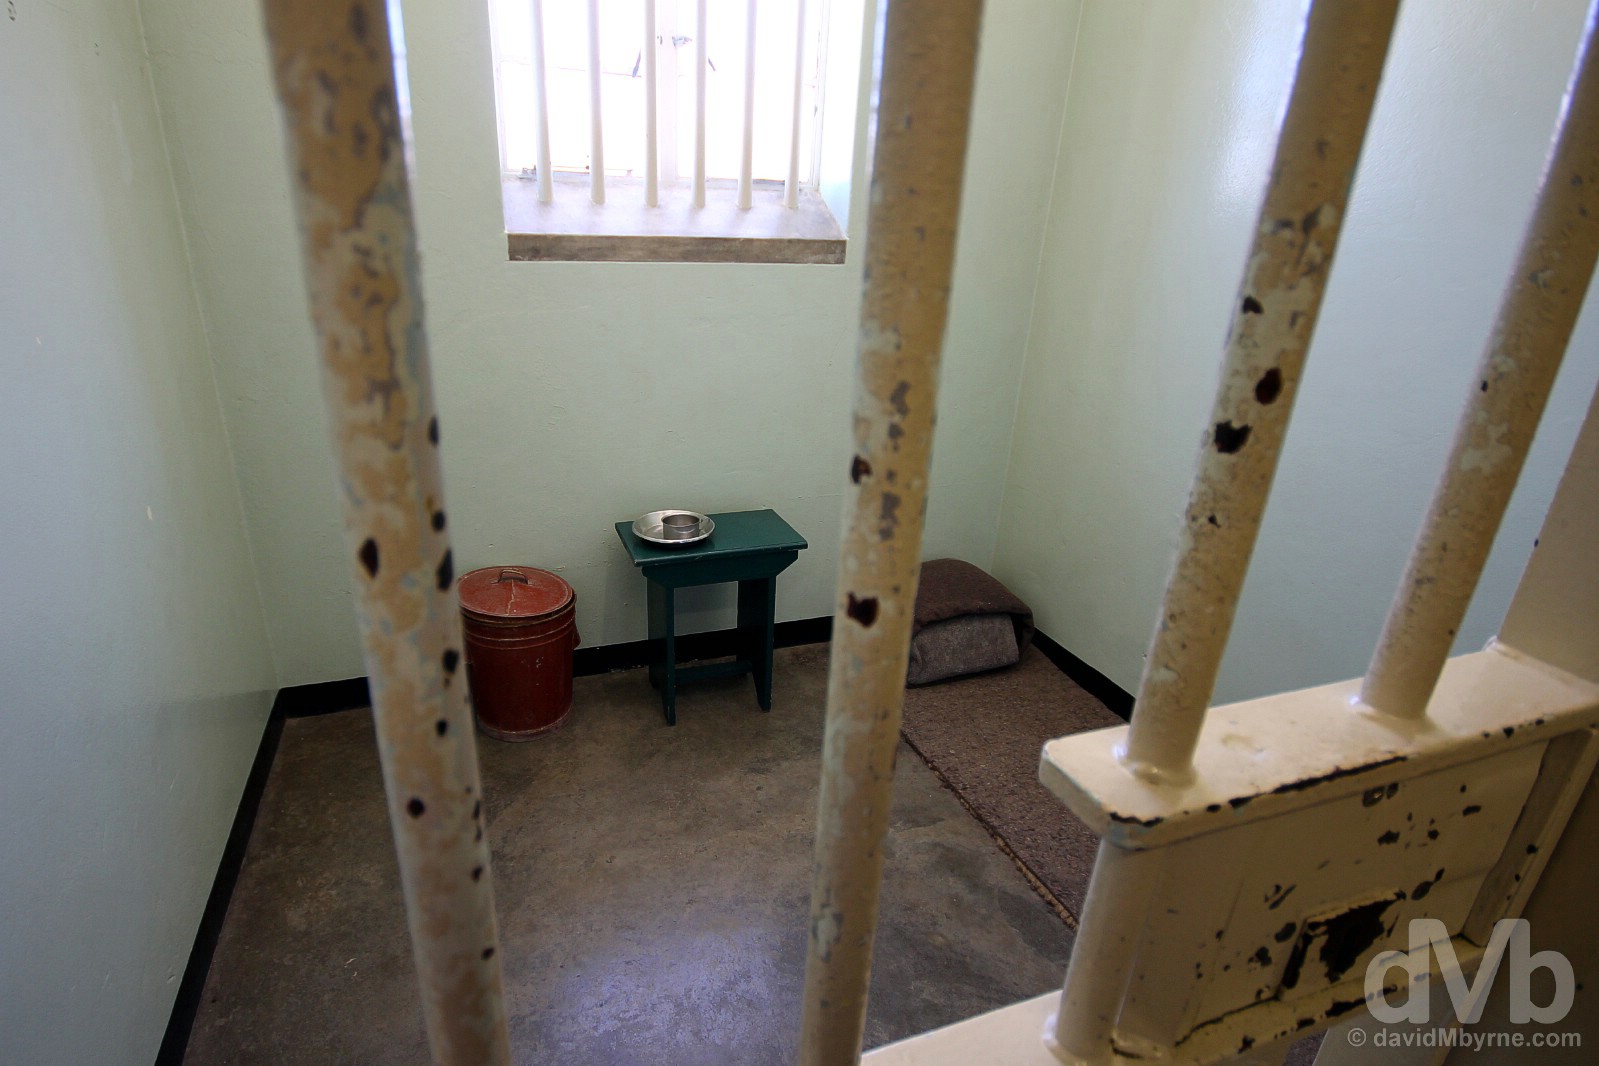 Number 4. Nelson Mandel's cell in the solitary confinement wing of the prison on Robben Island, Table Bay, Western Cape, South Africa. February 22, 2017.